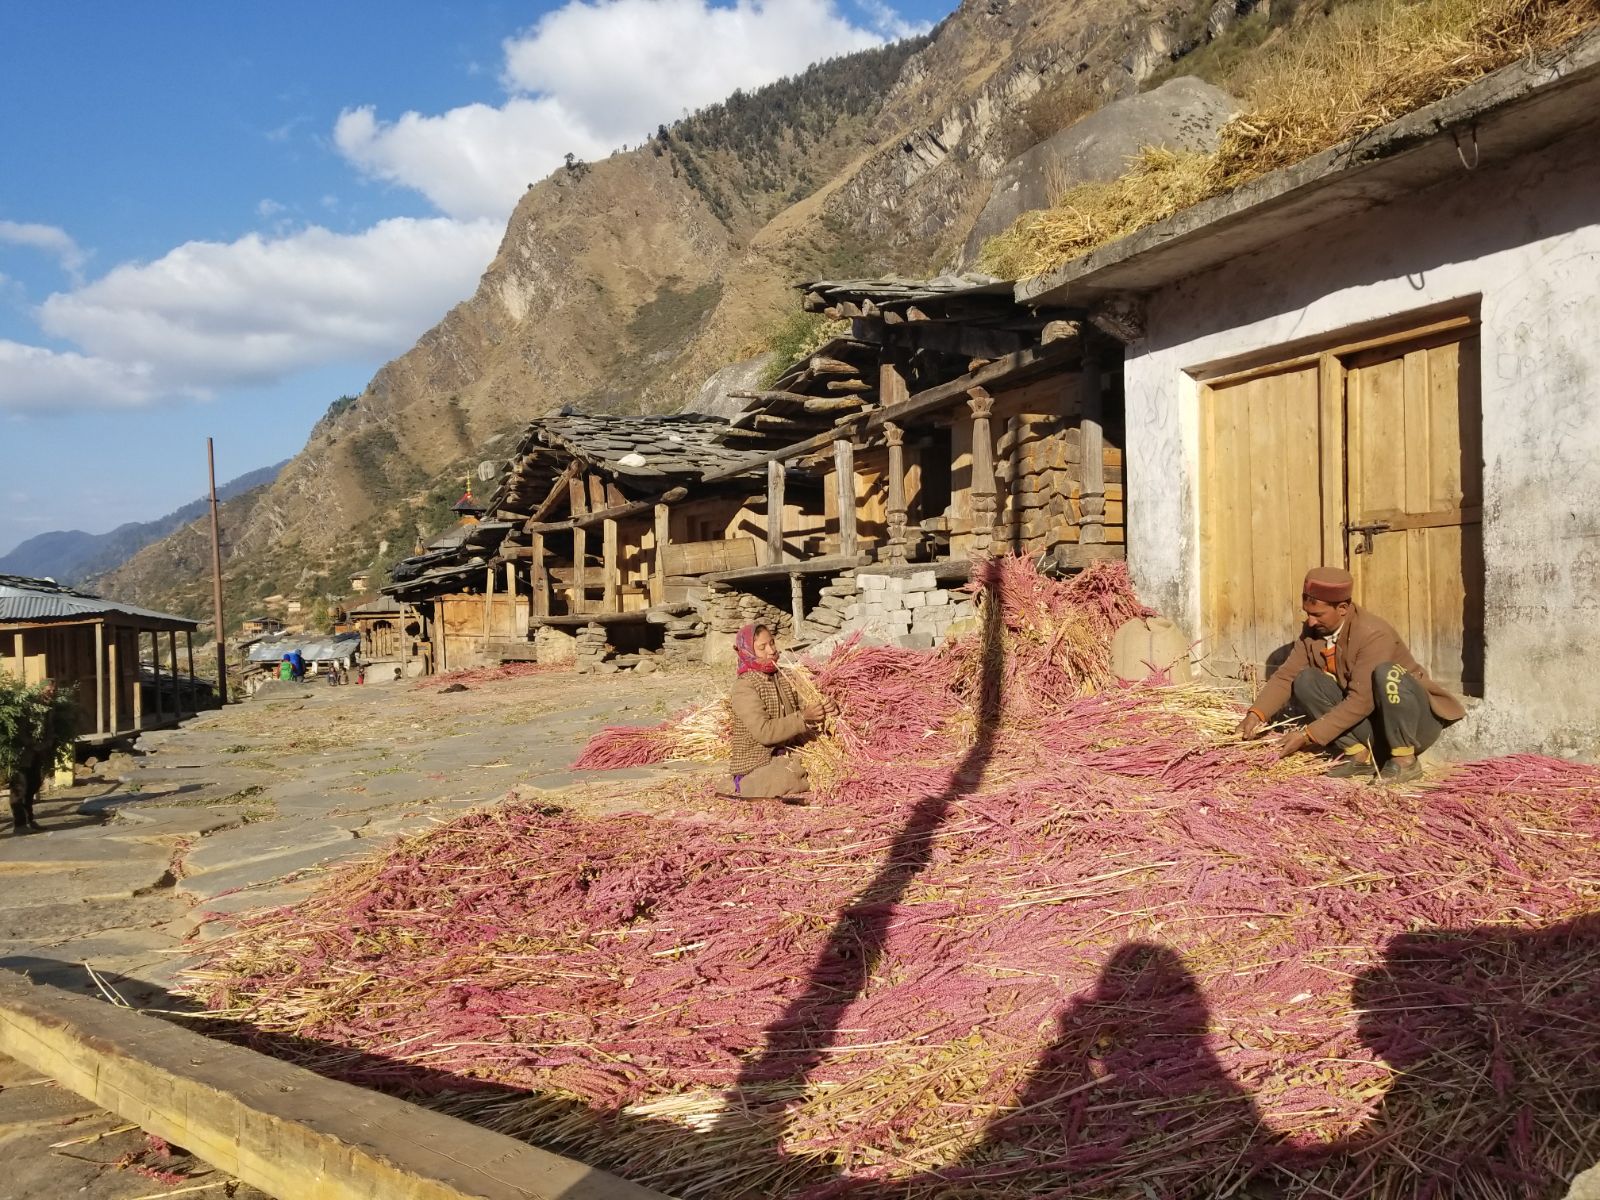 In Osla The last village locals harvest amaranth for the winter - Himalayan Institute